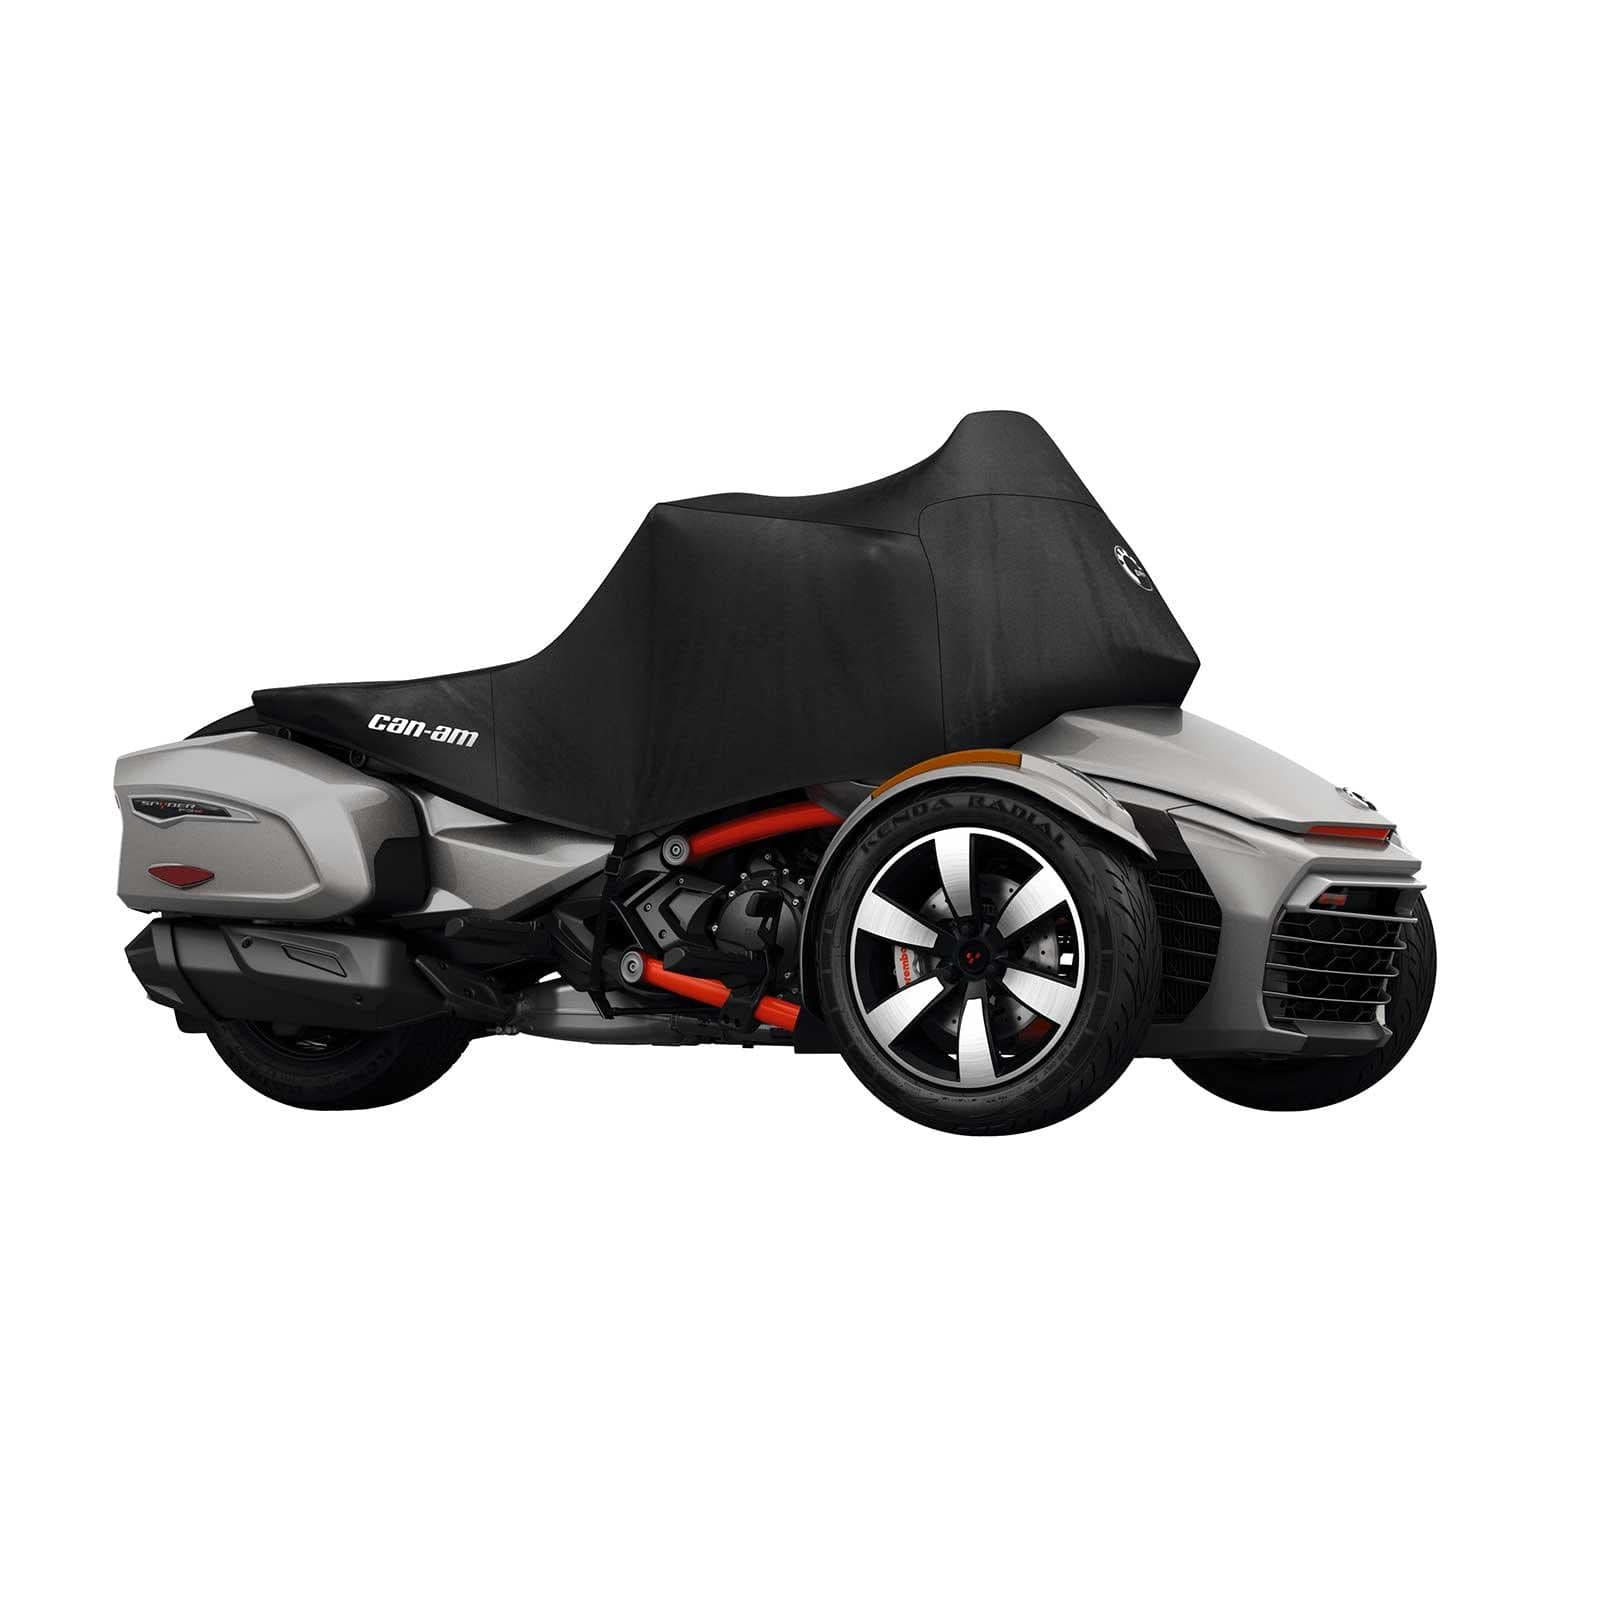 Travel Cover - Spyder F3-T, F3 Limited 2016 - Factory Recreation